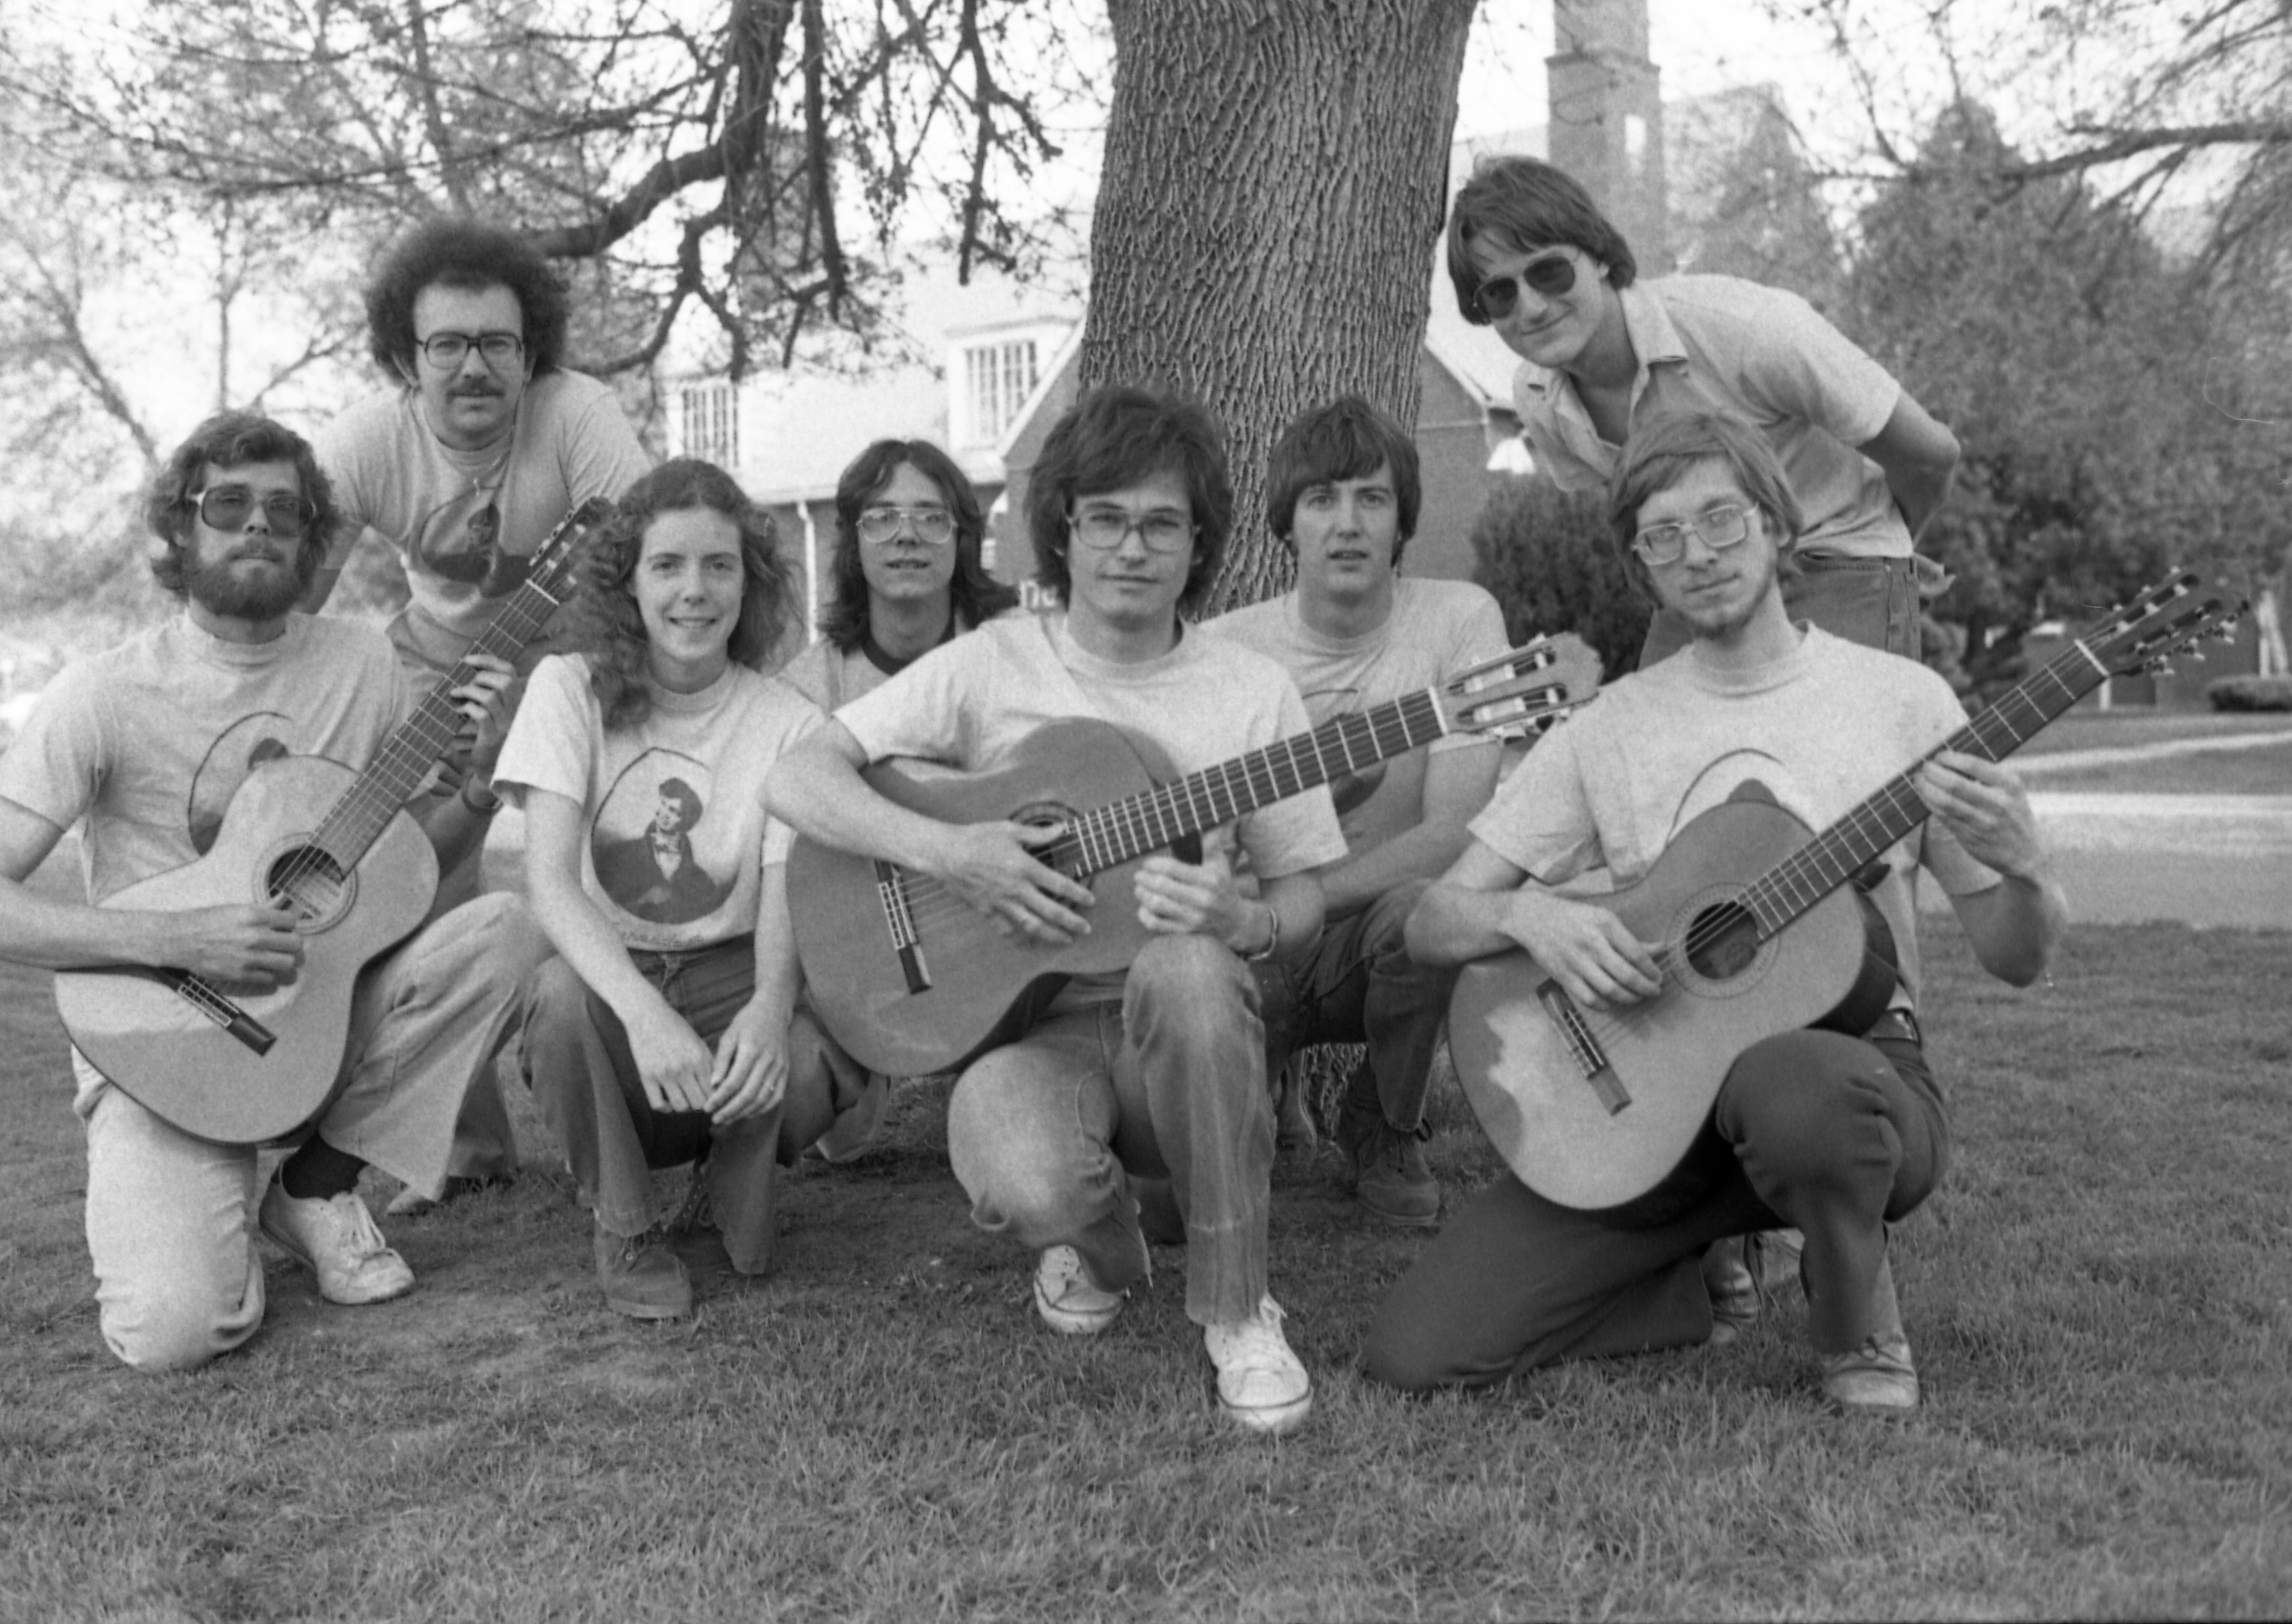 8 Guitar Society members pose for a photo; three are holding guitars